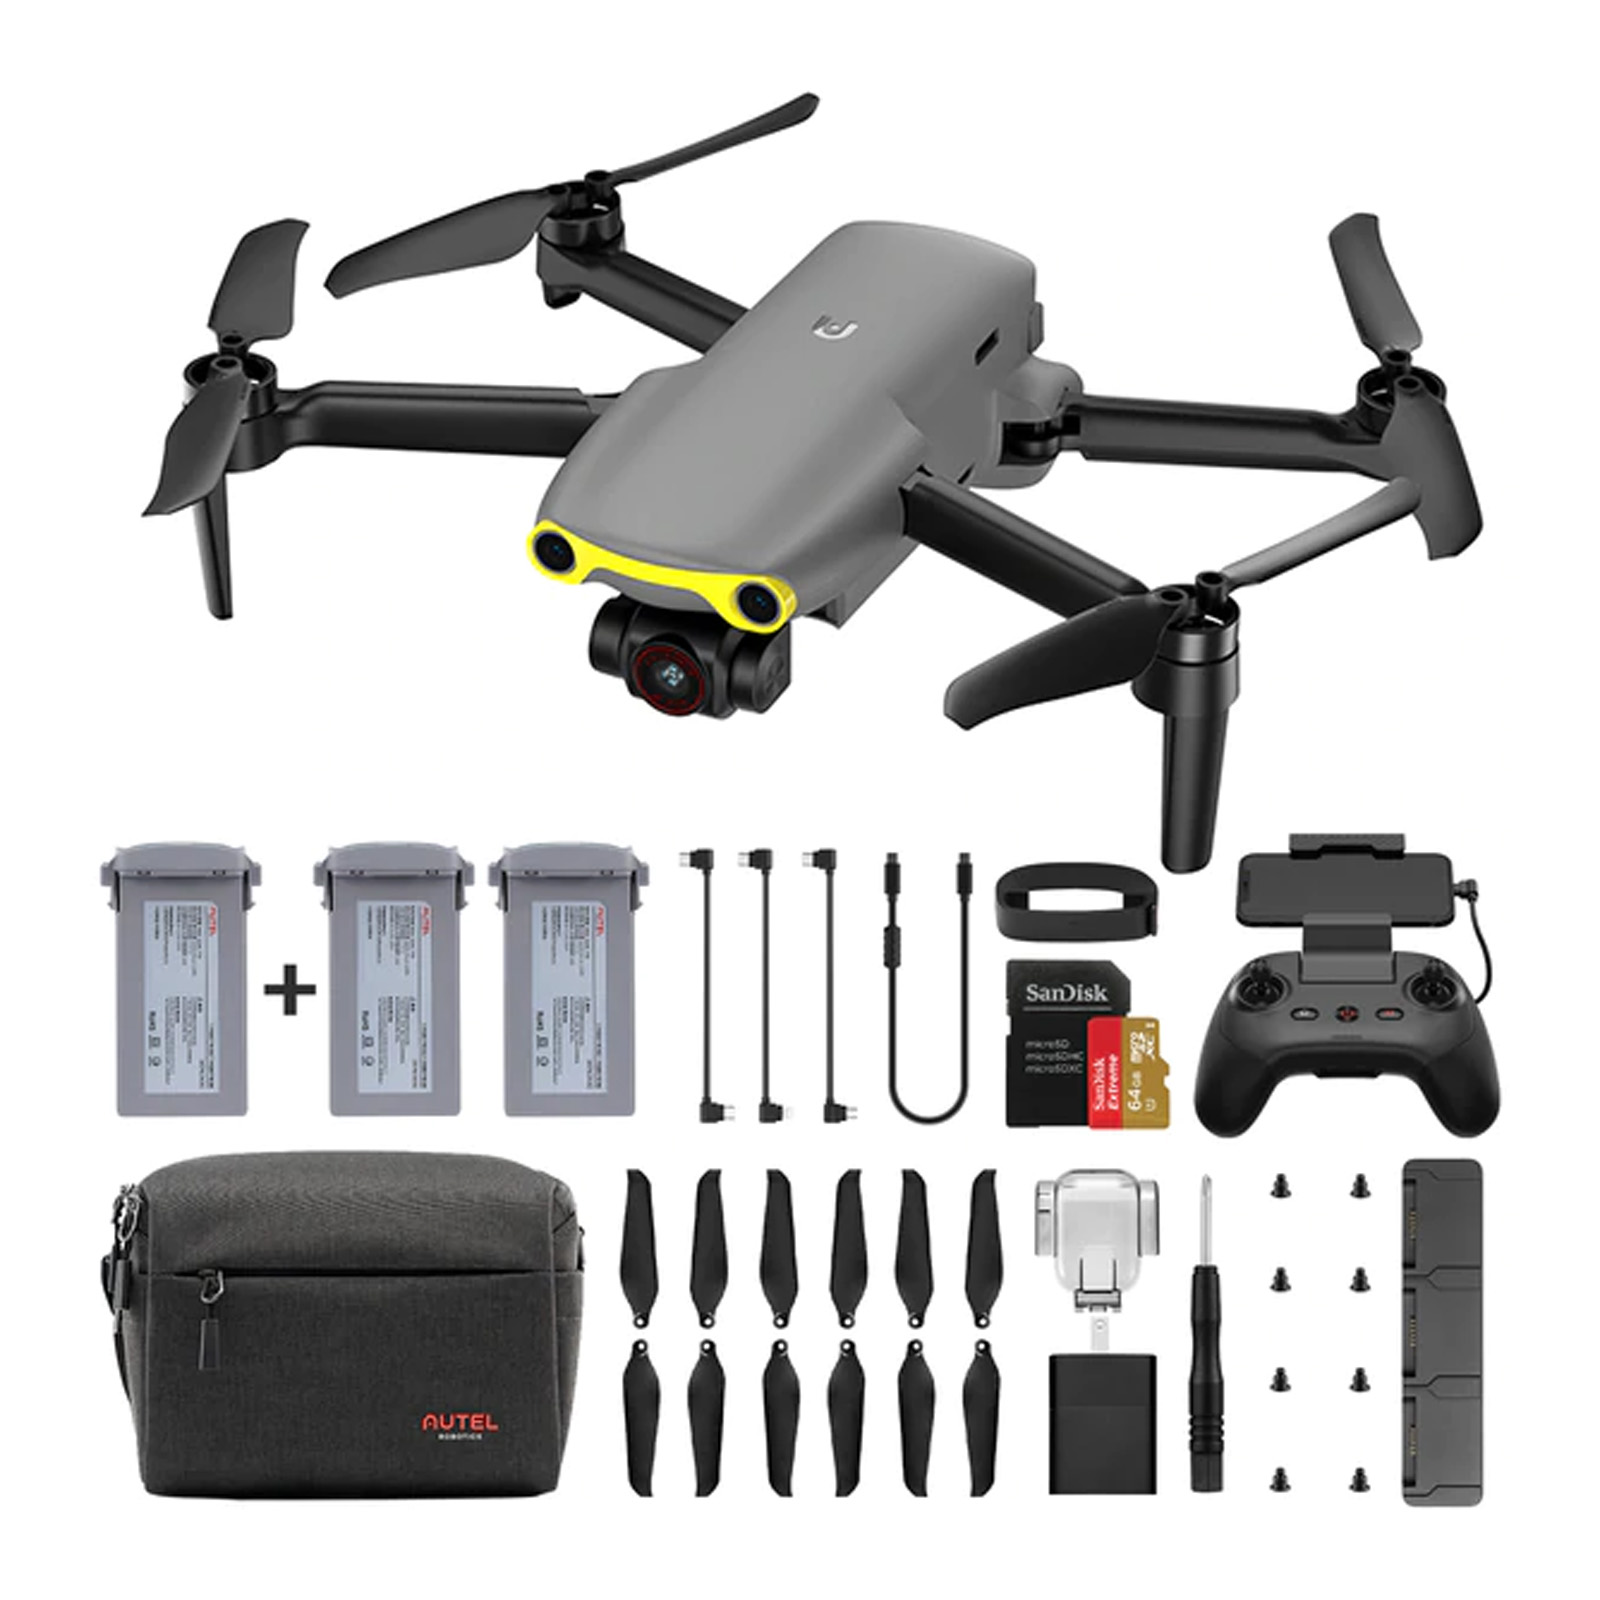  Autel Robotics EVO Nano+ Premium Bundle, 249g Mini Drone with  4K RYYB Camera, No Geo-Fencing, PDAF + CDAF Focus, 3-Axis Gimbal, 3-Way  Obstacle Avoidance, Extra 64G SD, Nano Plus Fly More